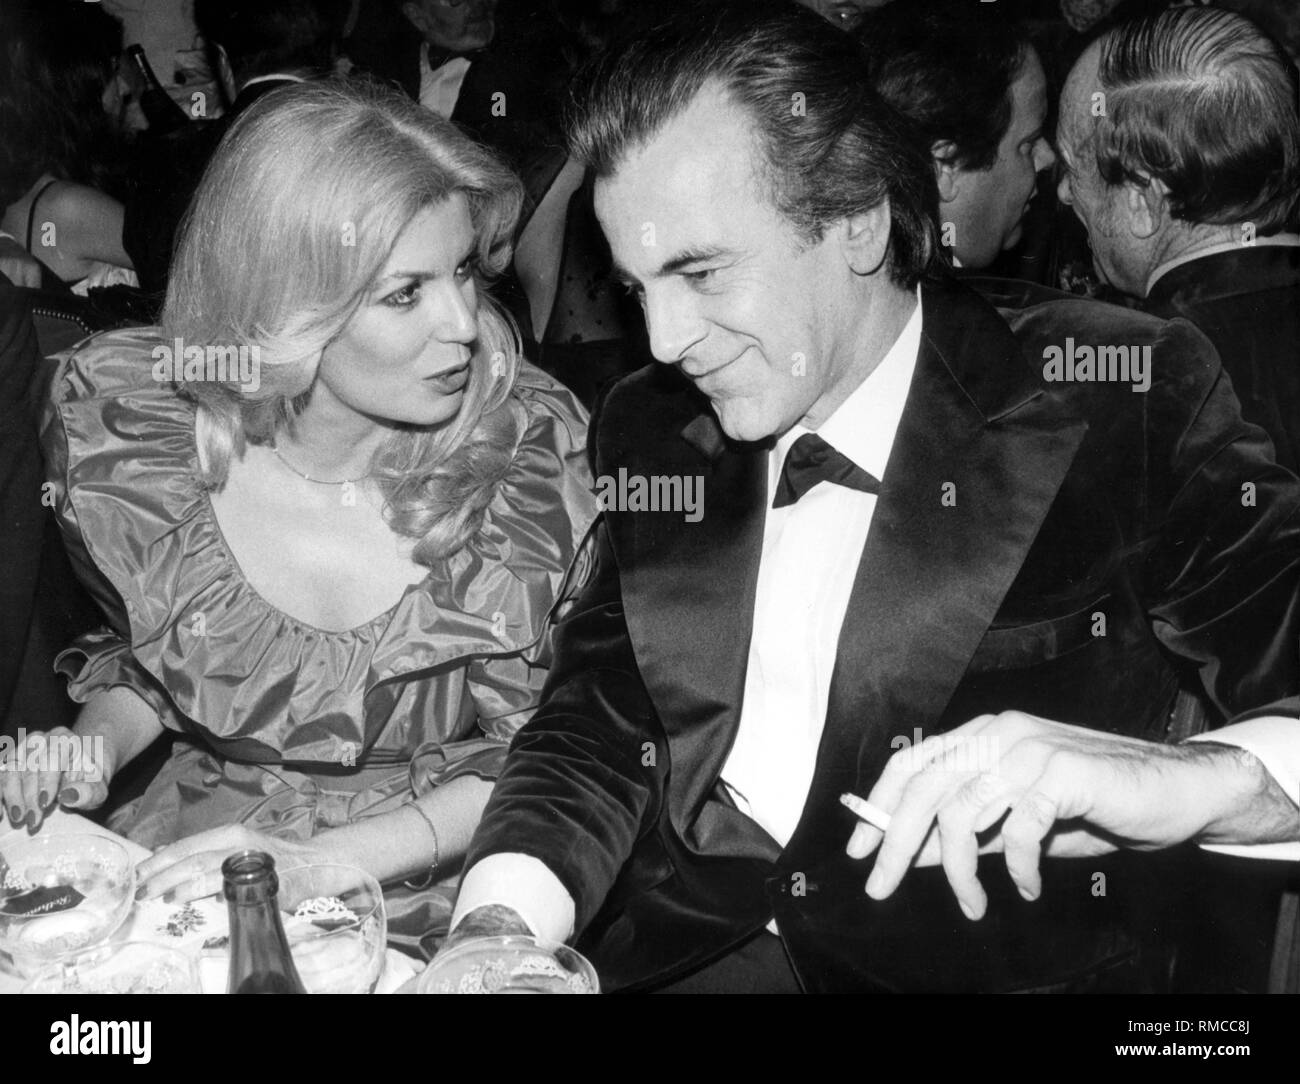 Maximilian Schell talks excited with the pretty actress colleague Christiane Krueger at the German Film Ball in 1983. Stock Photo